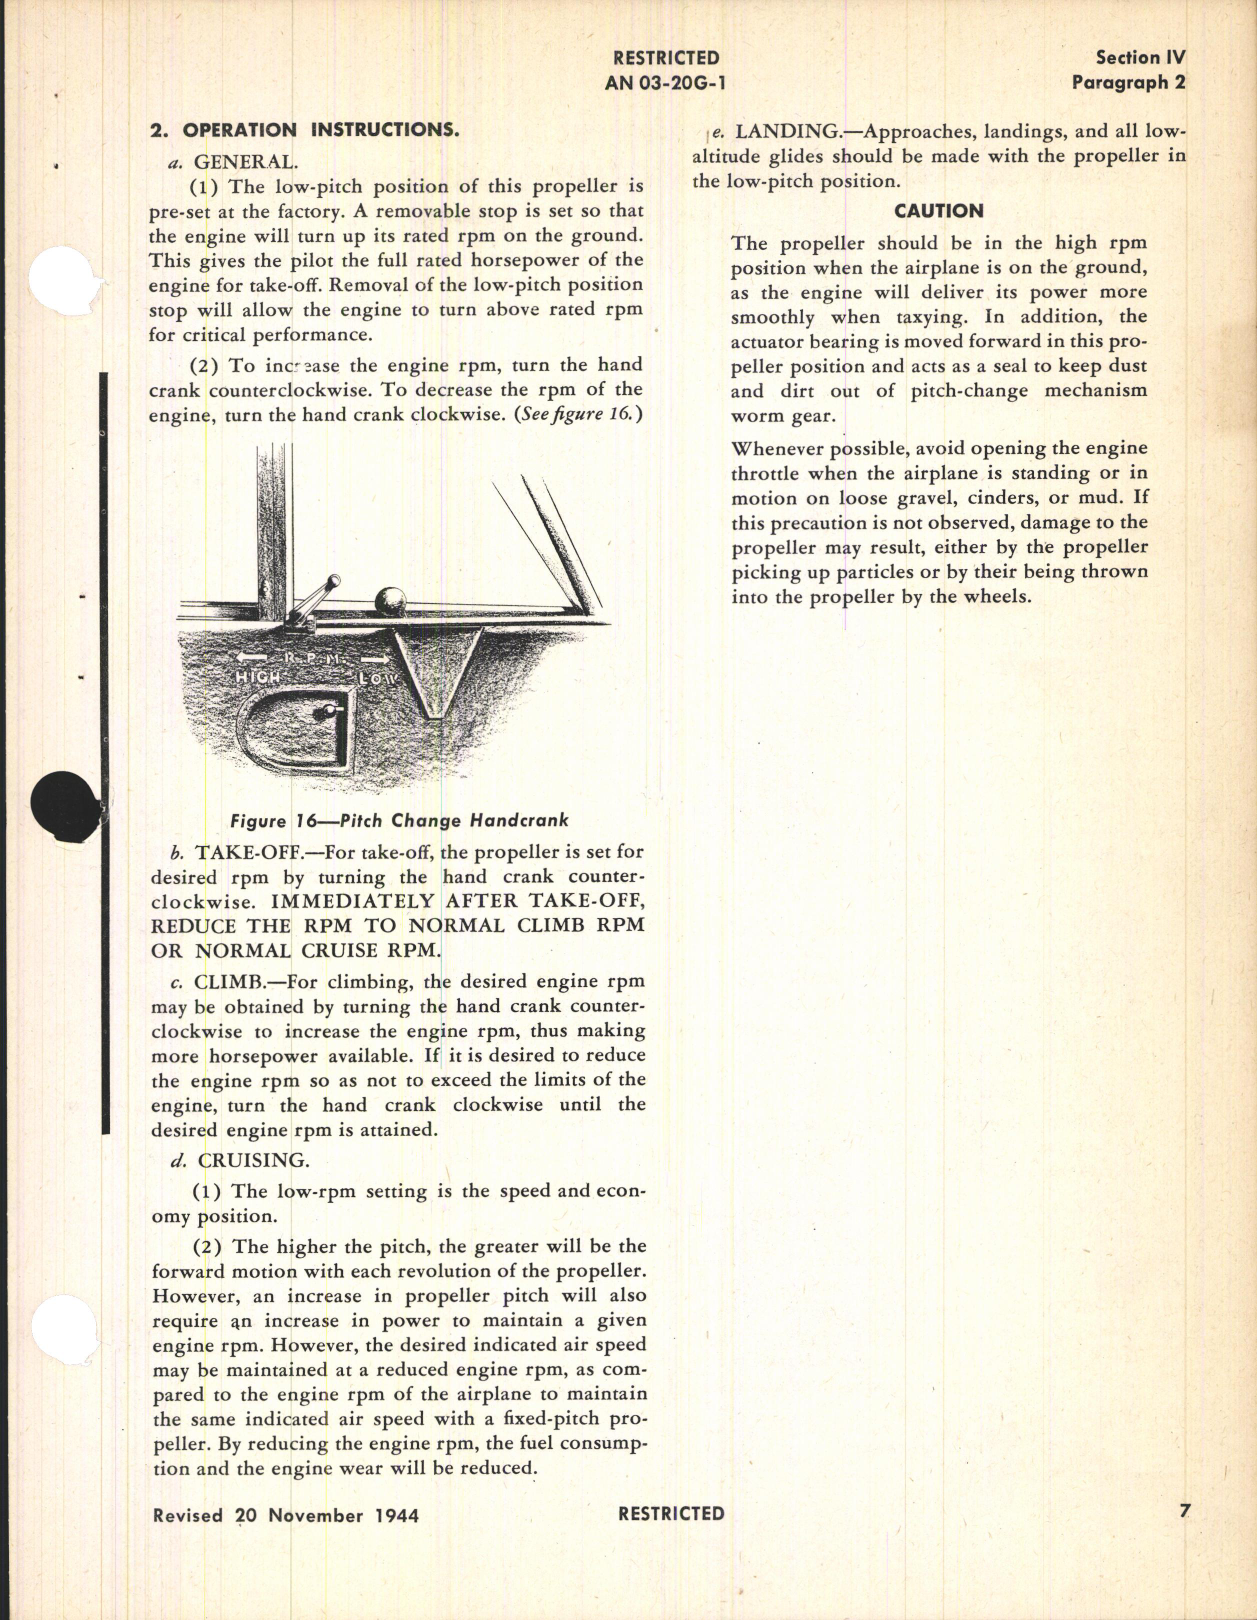 Sample page 5 from AirCorps Library document: Handbook of Instructions with Parts Catalog for Manual Controlled Propeller Model R002